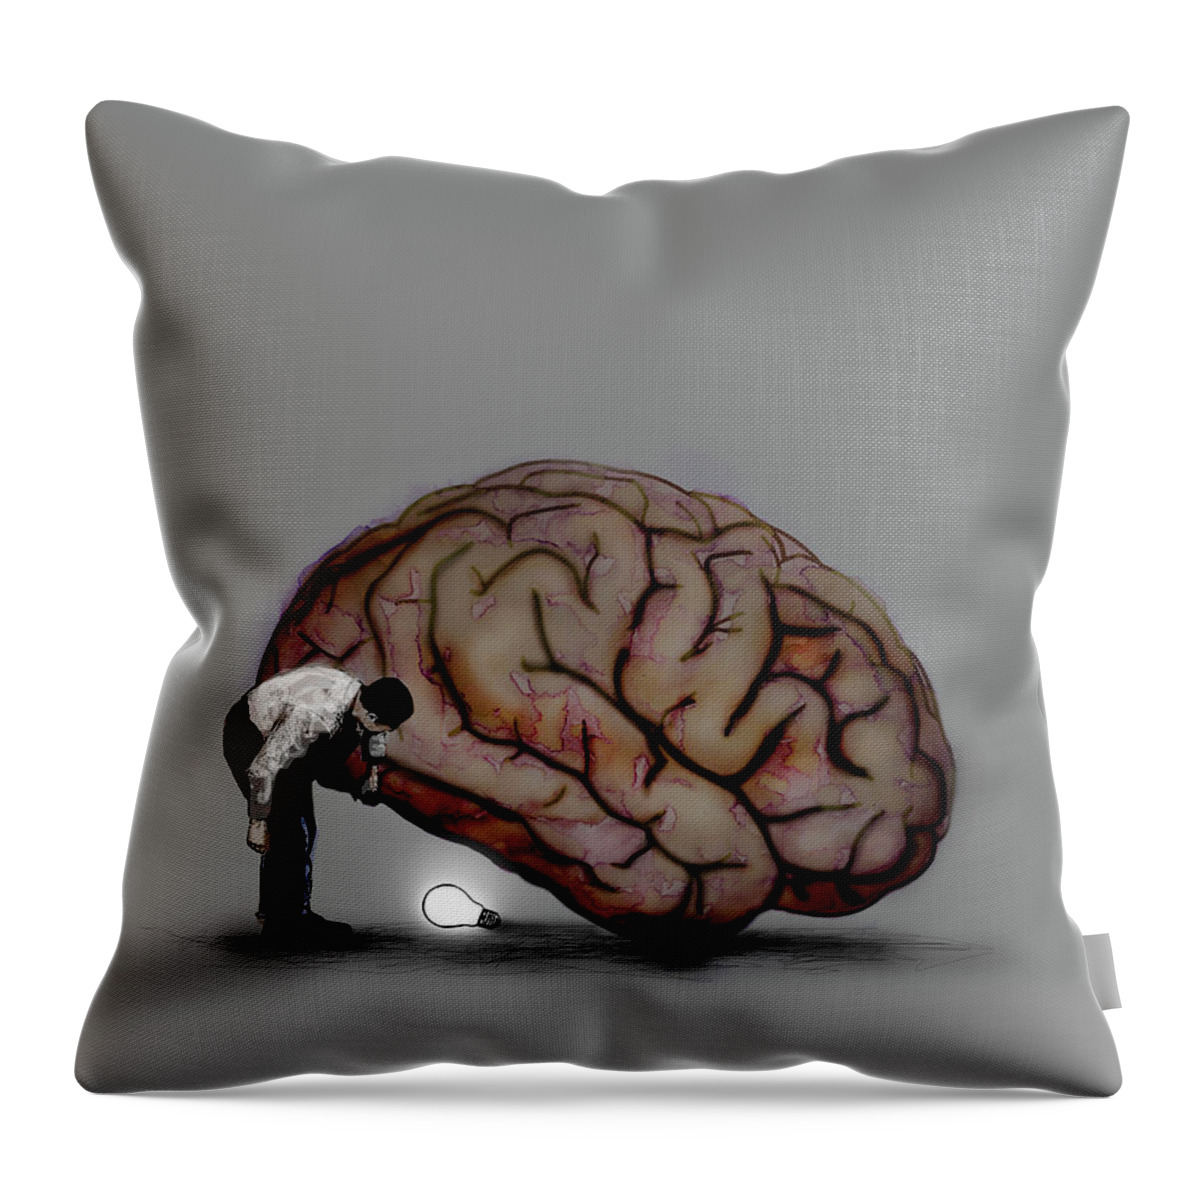 Adult Throw Pillow featuring the photograph Man Finding Illuminated Light Bulb by Ikon Ikon Images